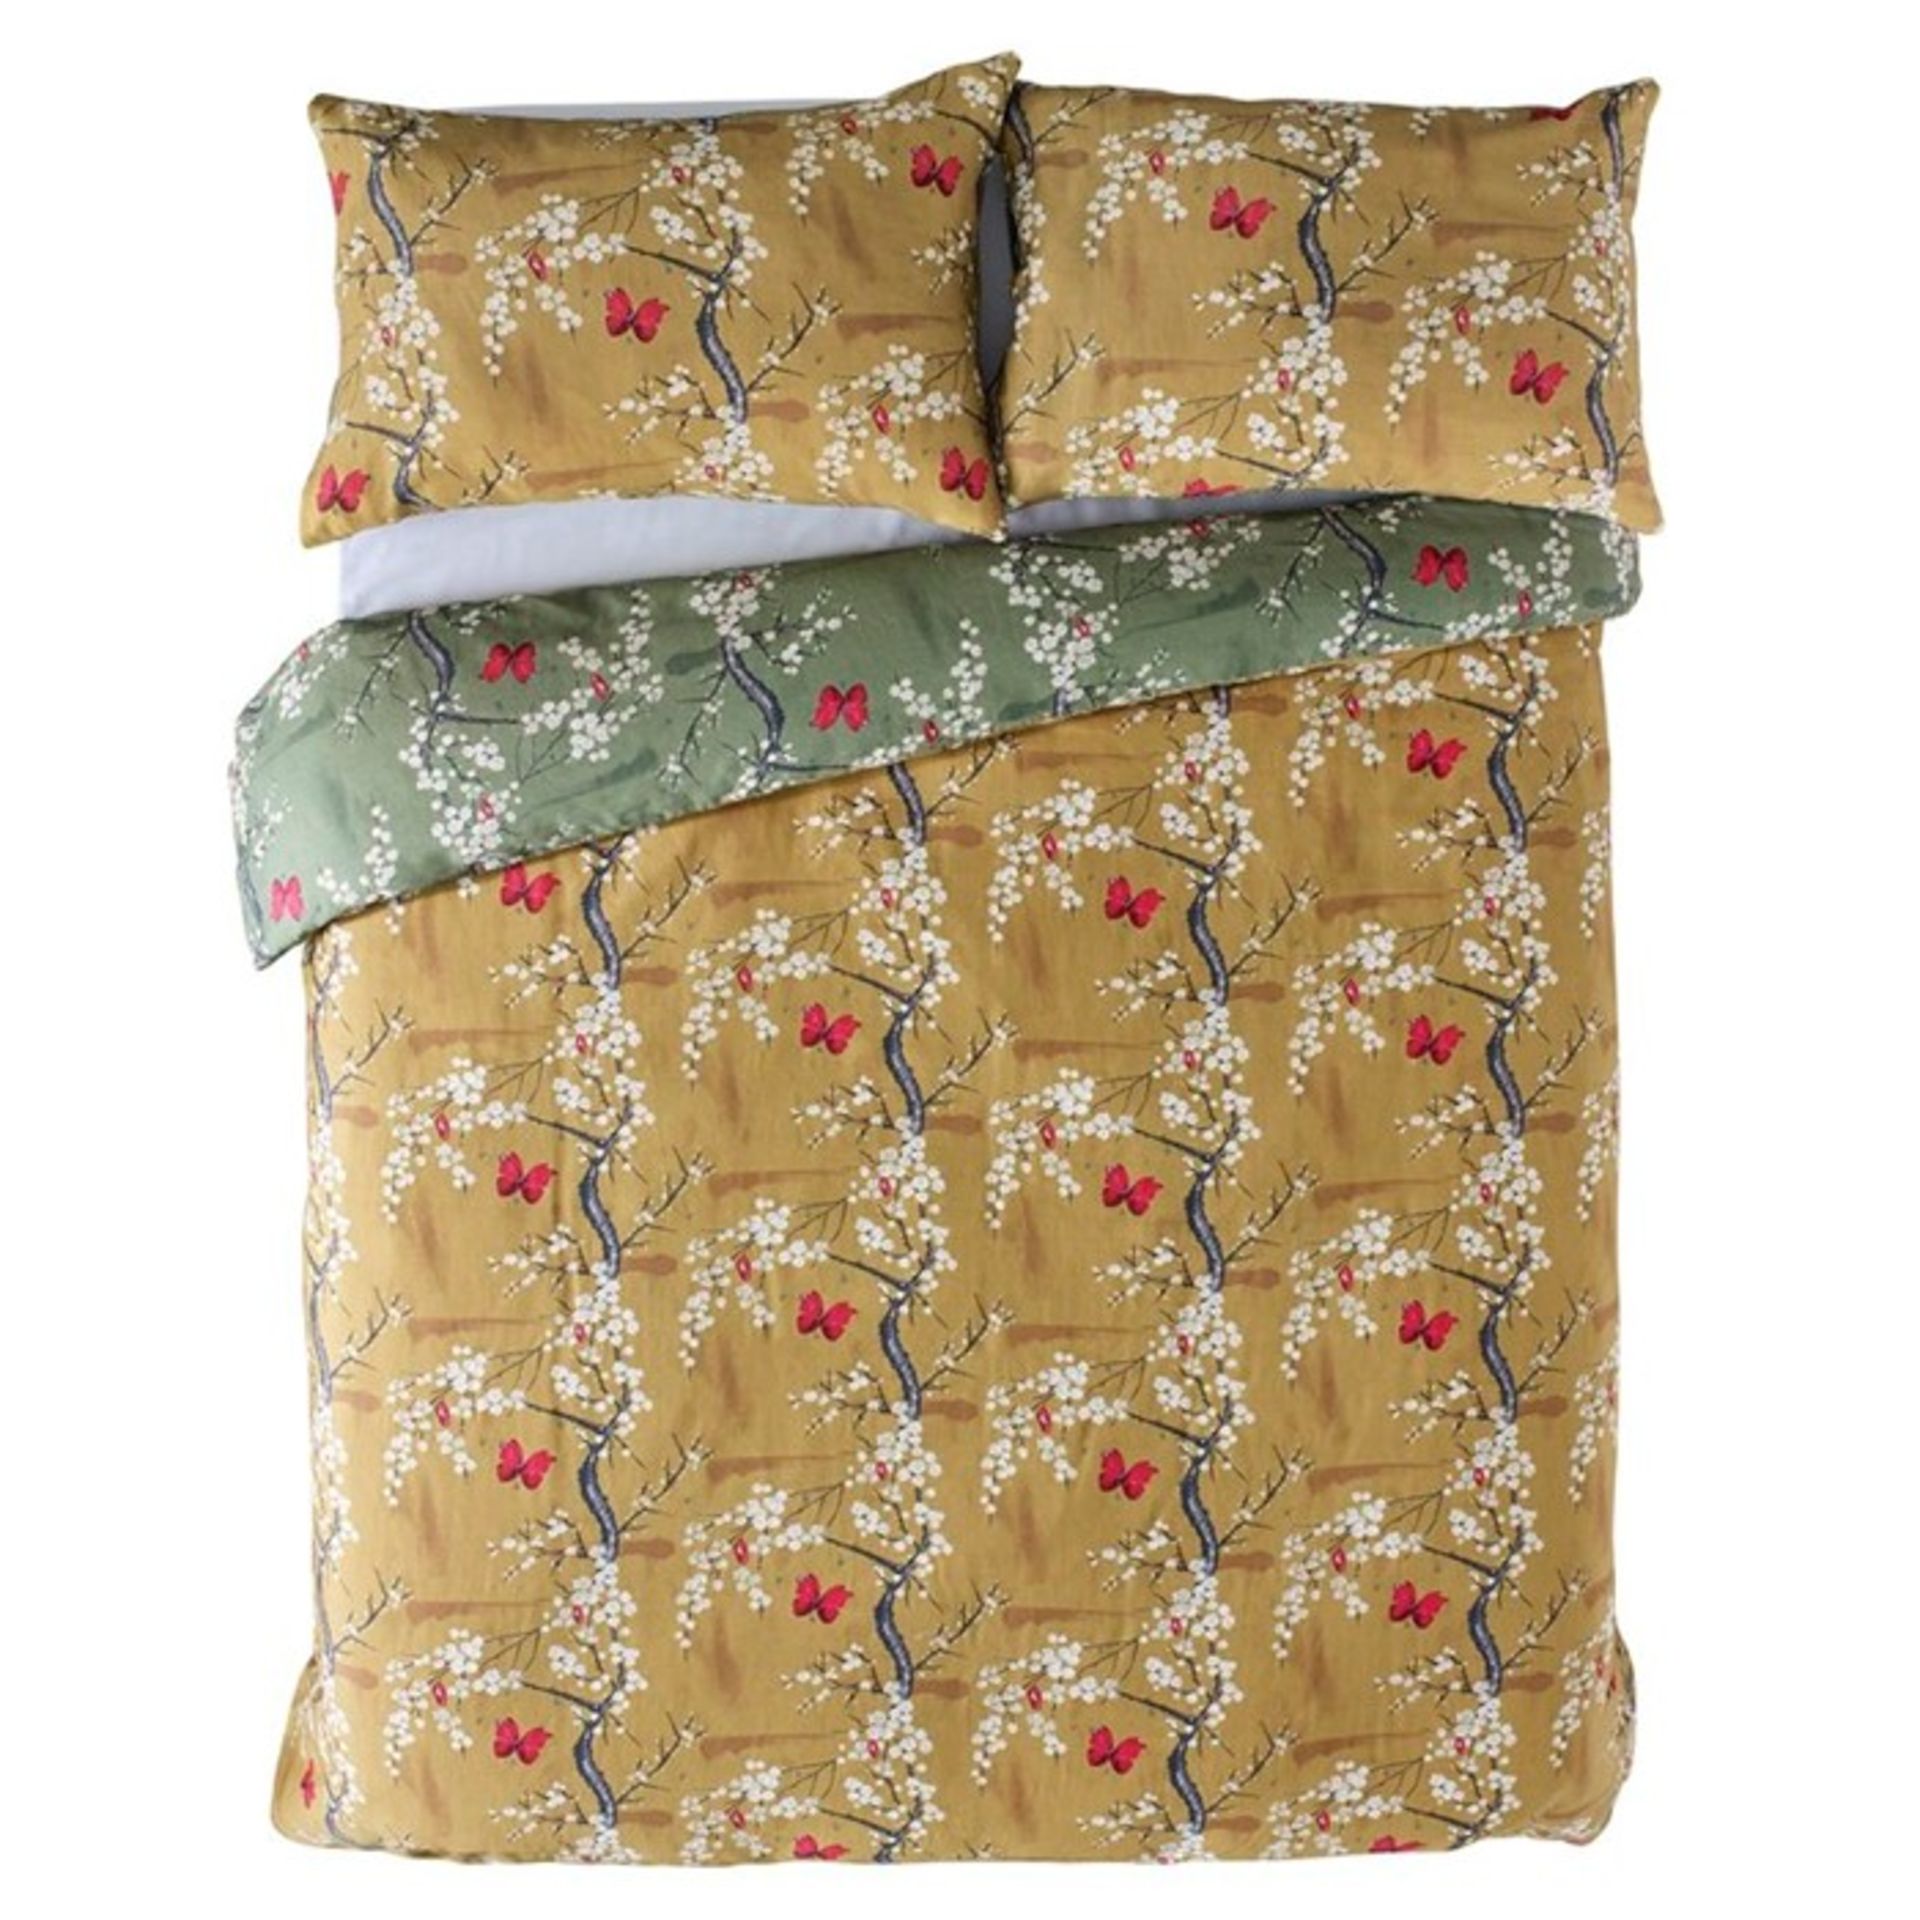 The Chateau By Angel Strawbridge, Blossom Duvet Cover Set (DOUBLE) - RRP £46.99 (THCH1096 - HL8 -